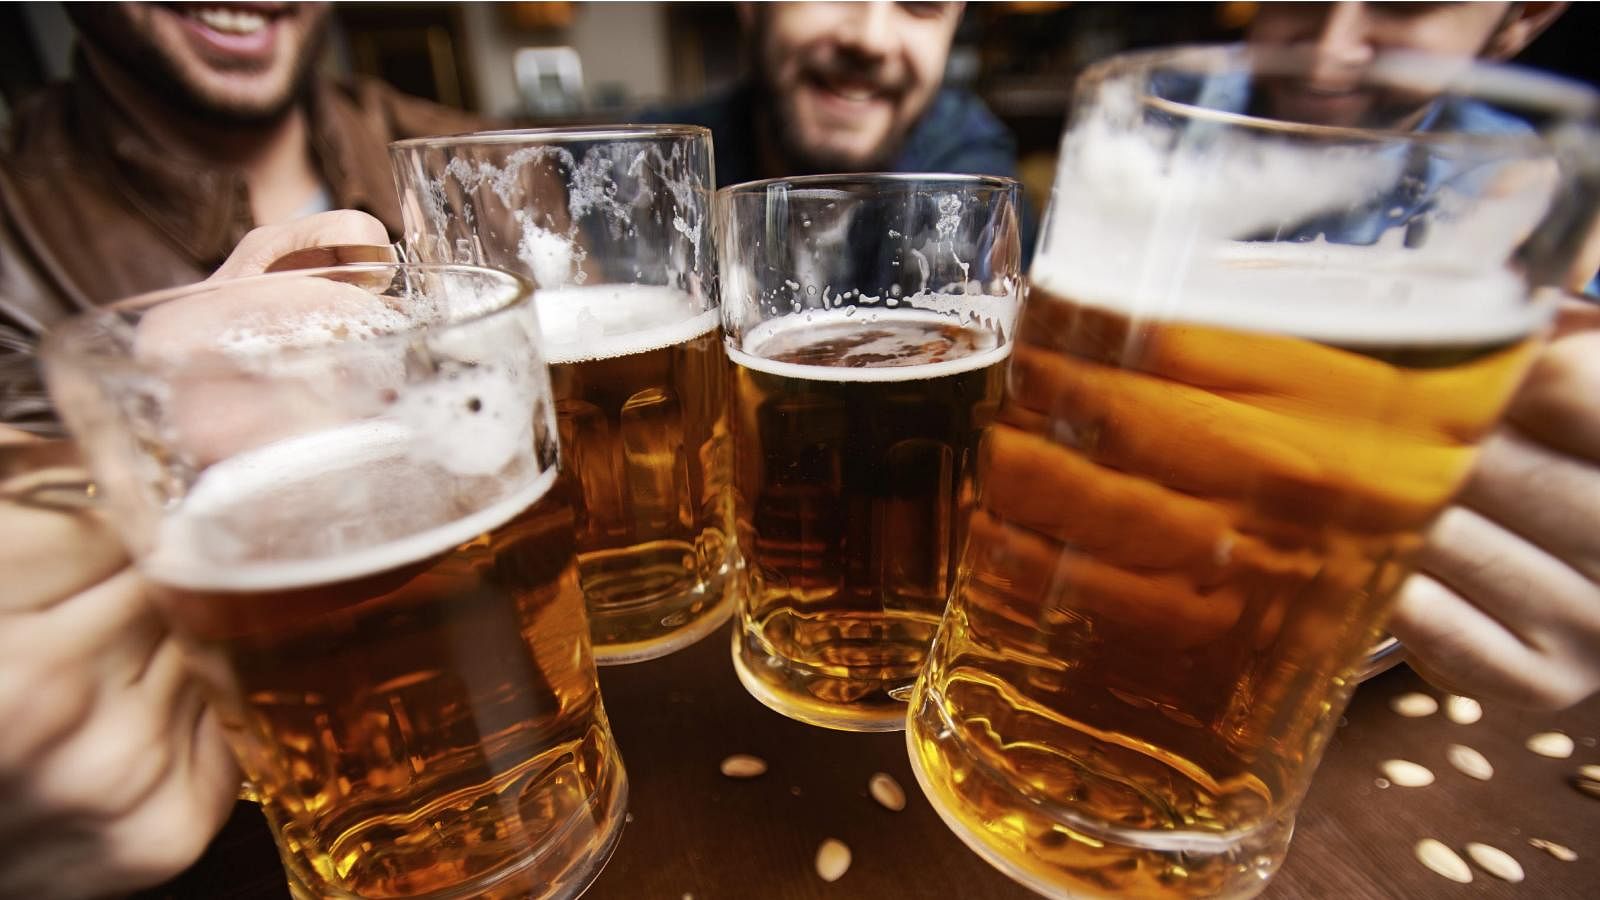 Even “social drinkers” are vulnerable to developing long-term health conditions because of the amount of alcohol they regularly consume. (Photo: iStock)